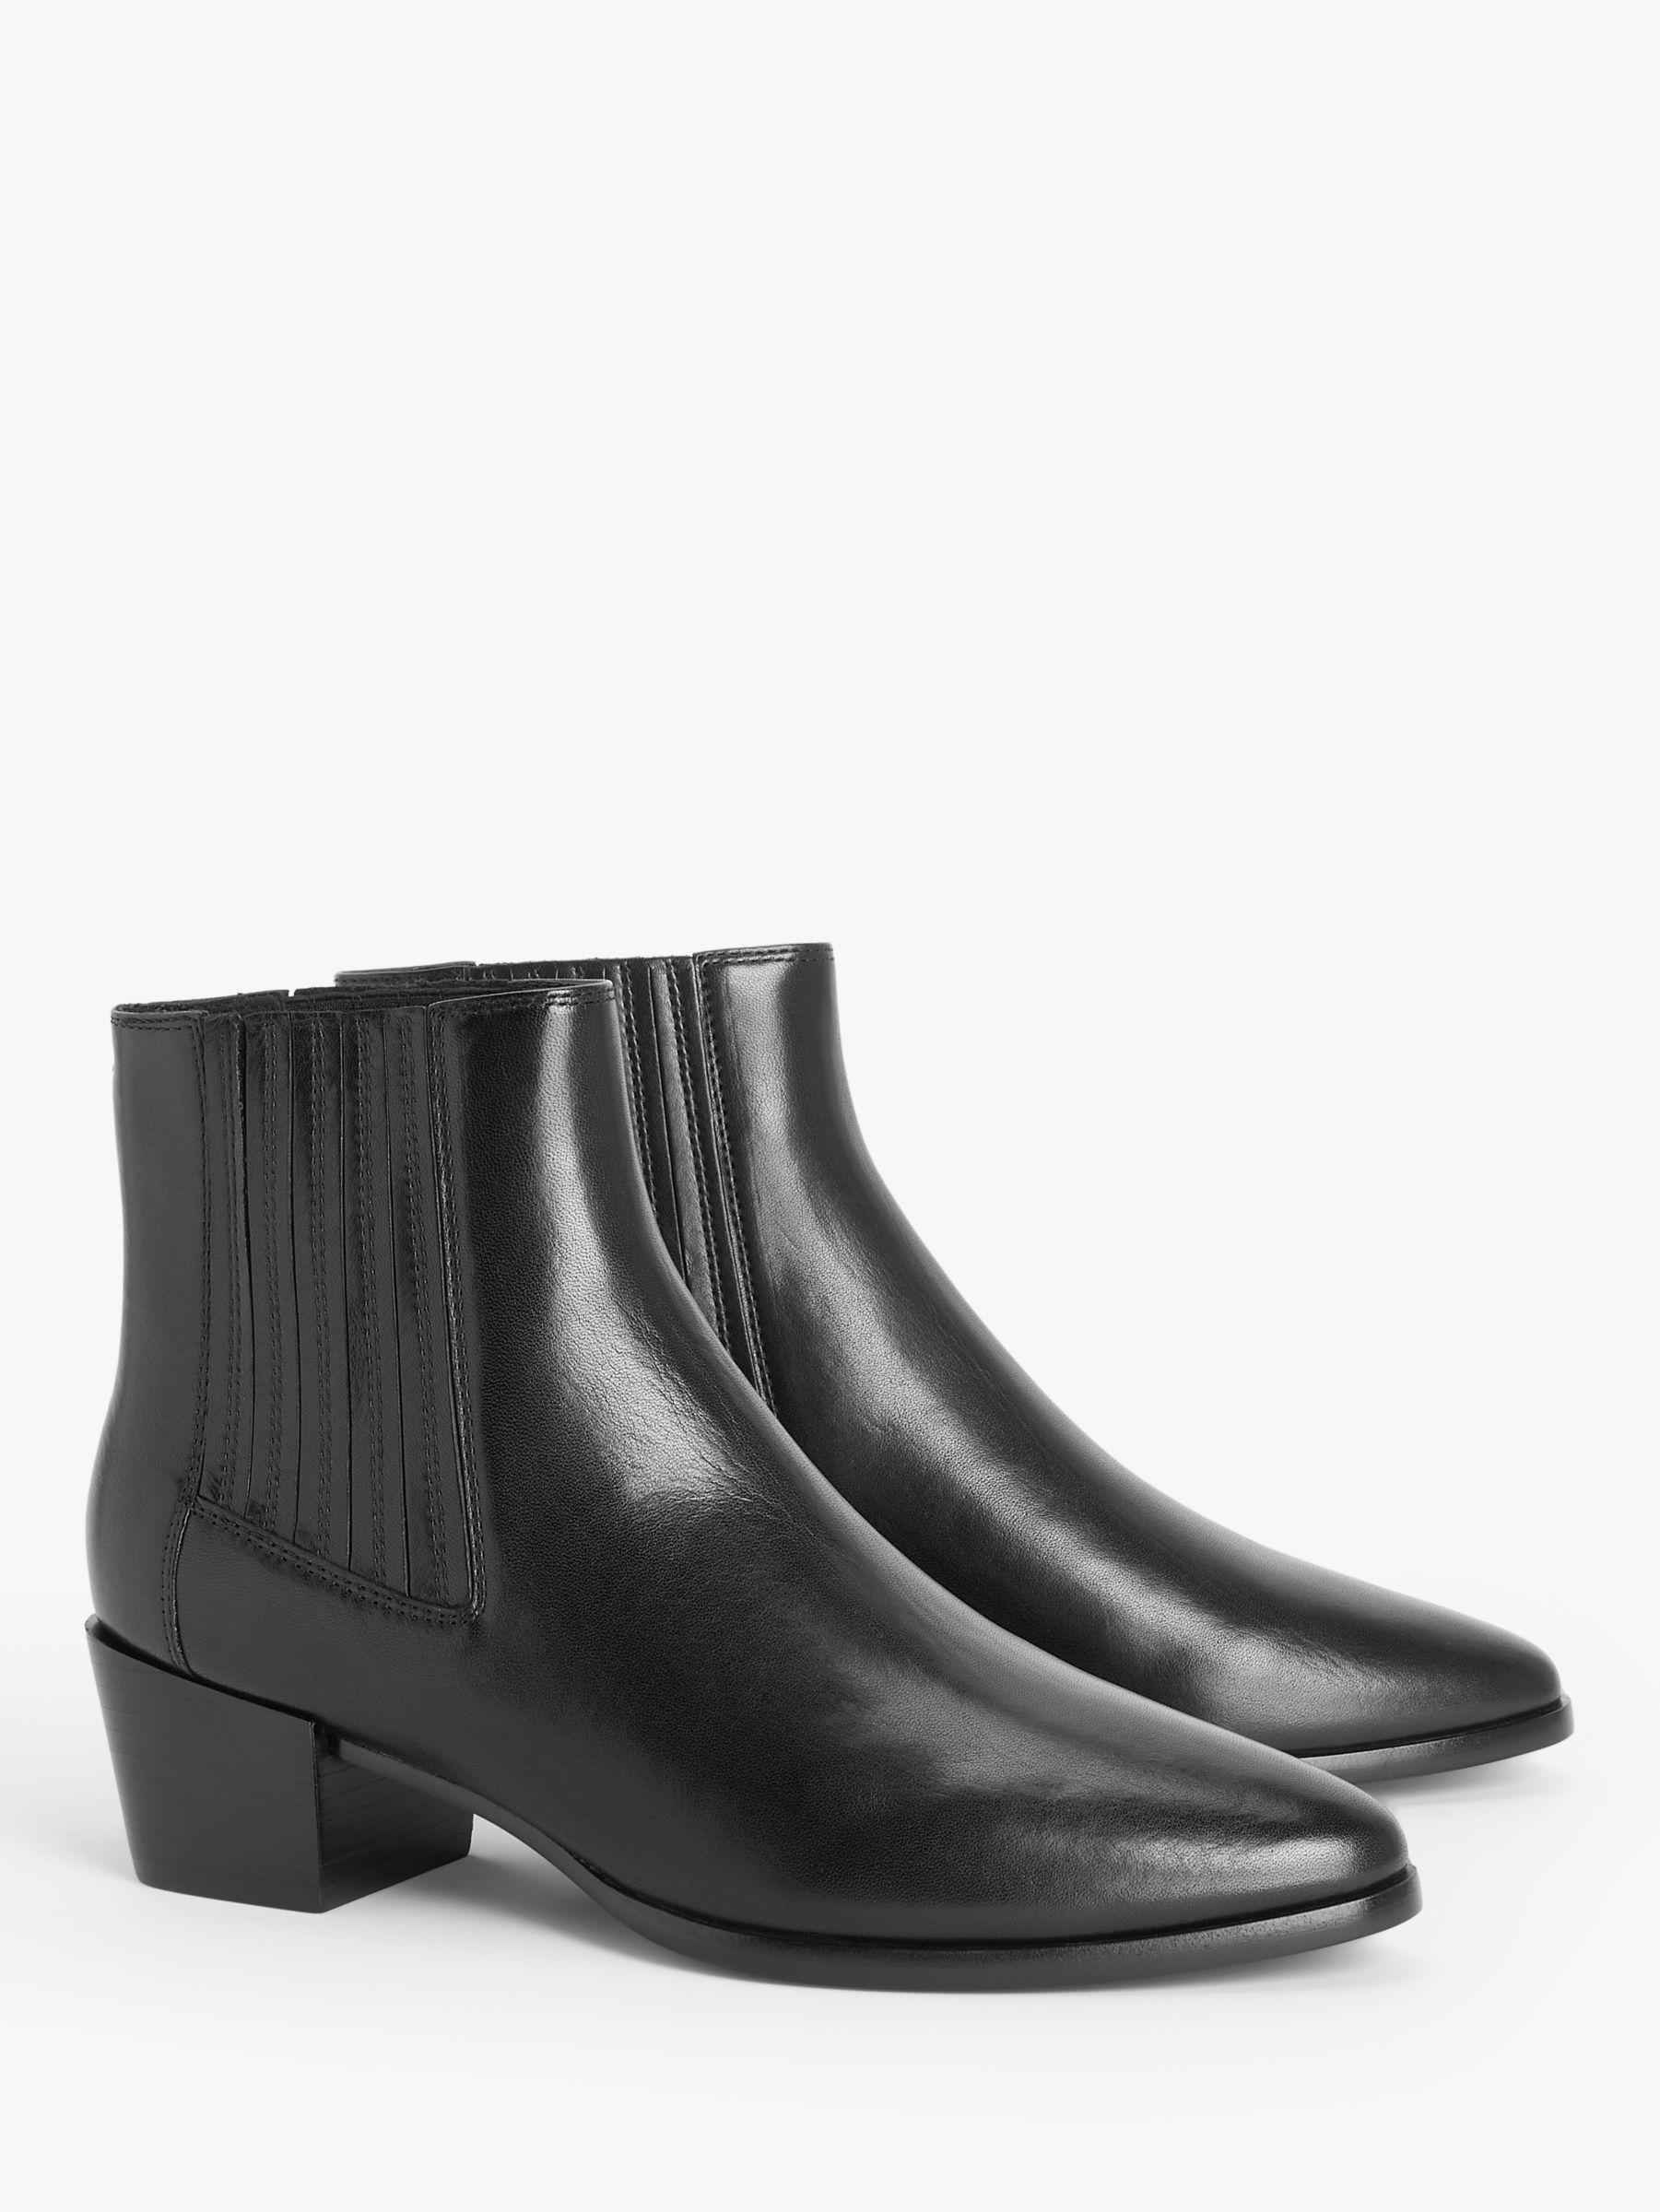 rag Rover Leather Chelsea Boots, Black at John Lewis &